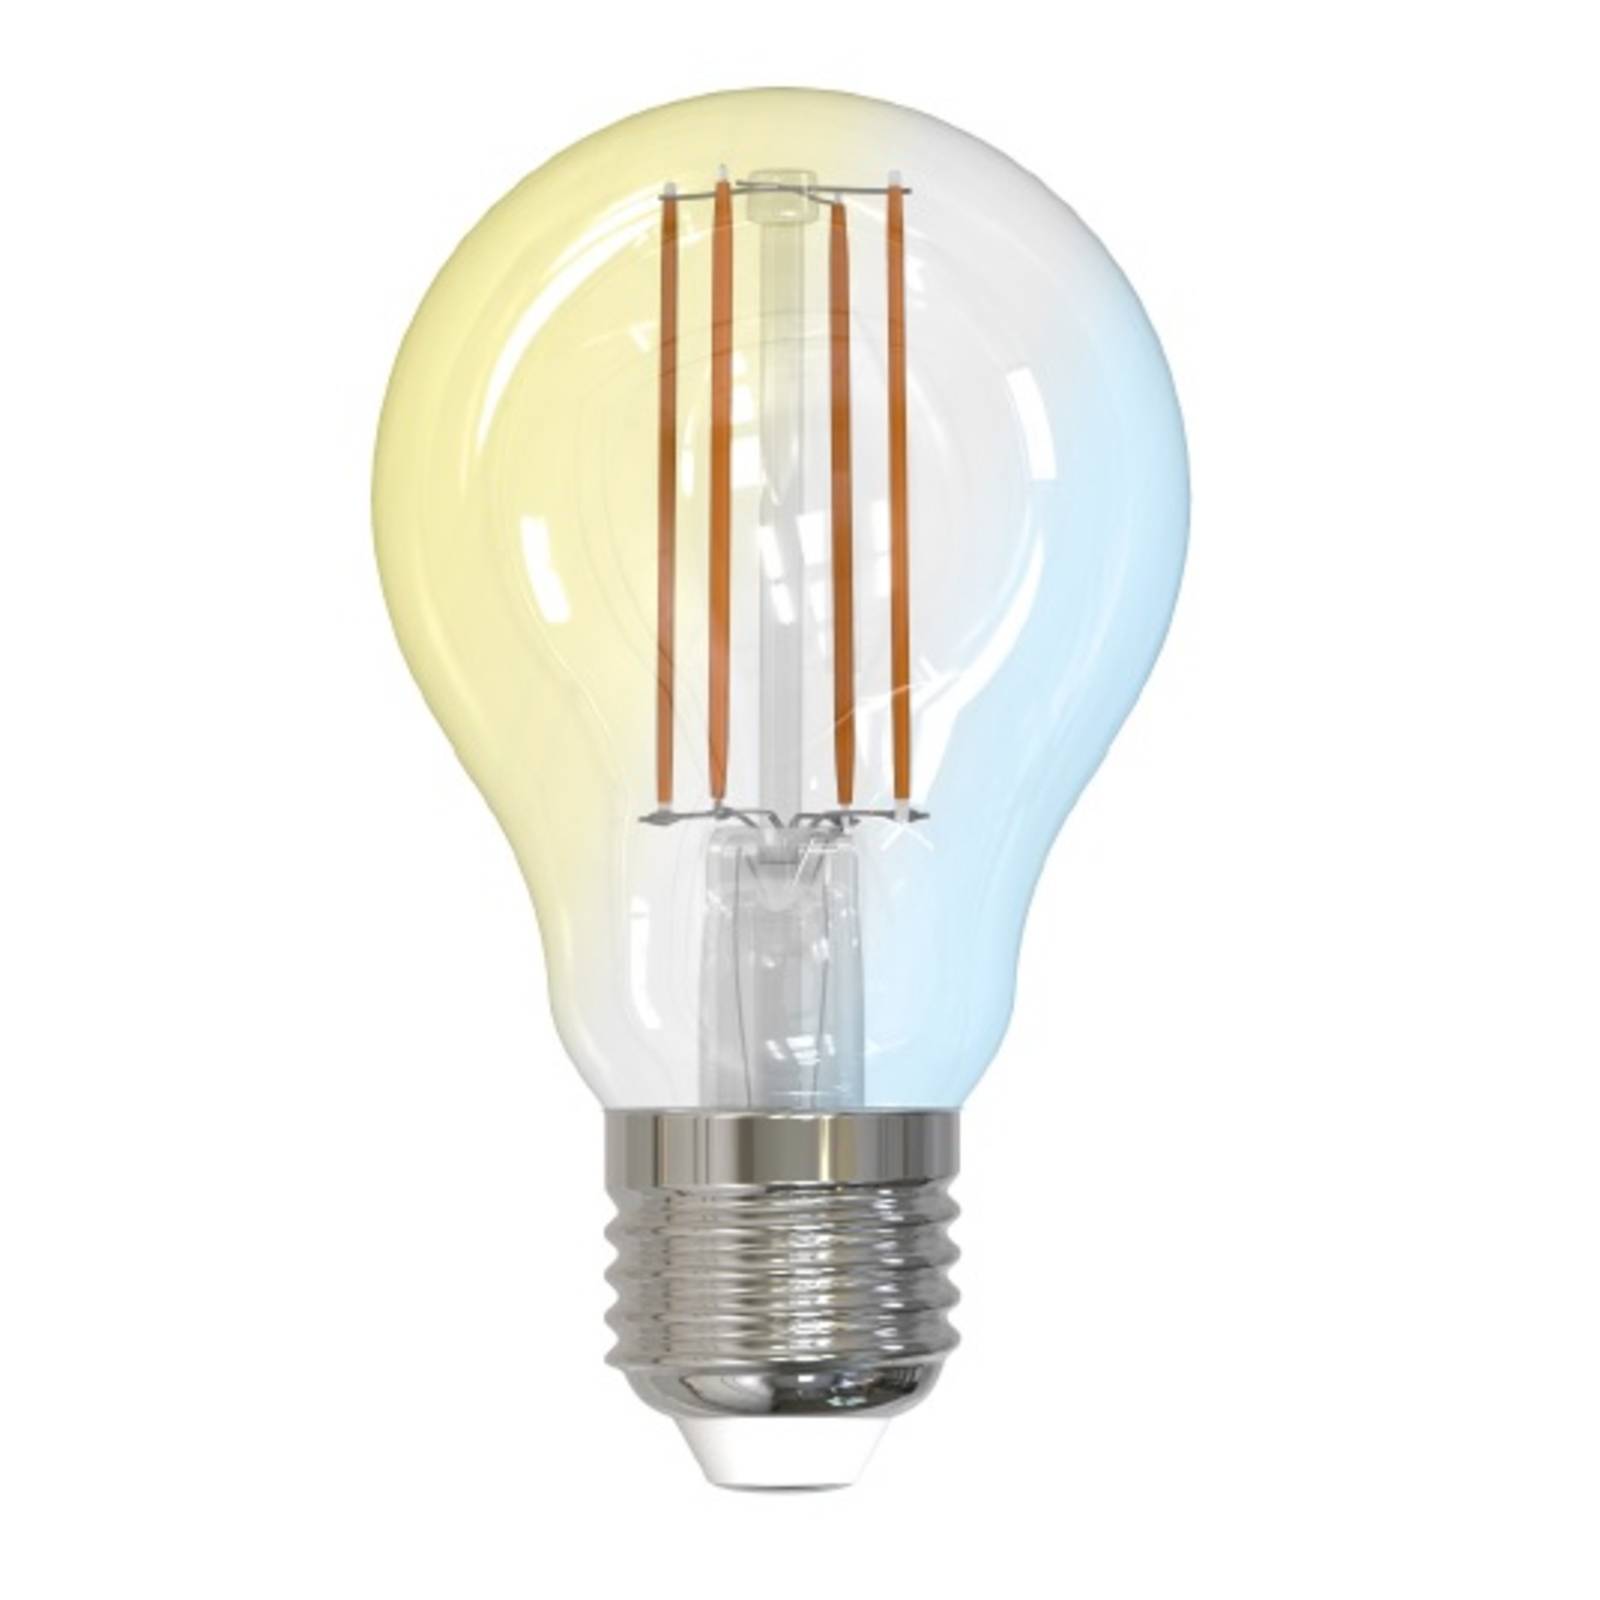 Image of Ampoule LED E27 7 W filament dimmable CCT Tuya 4251911747522